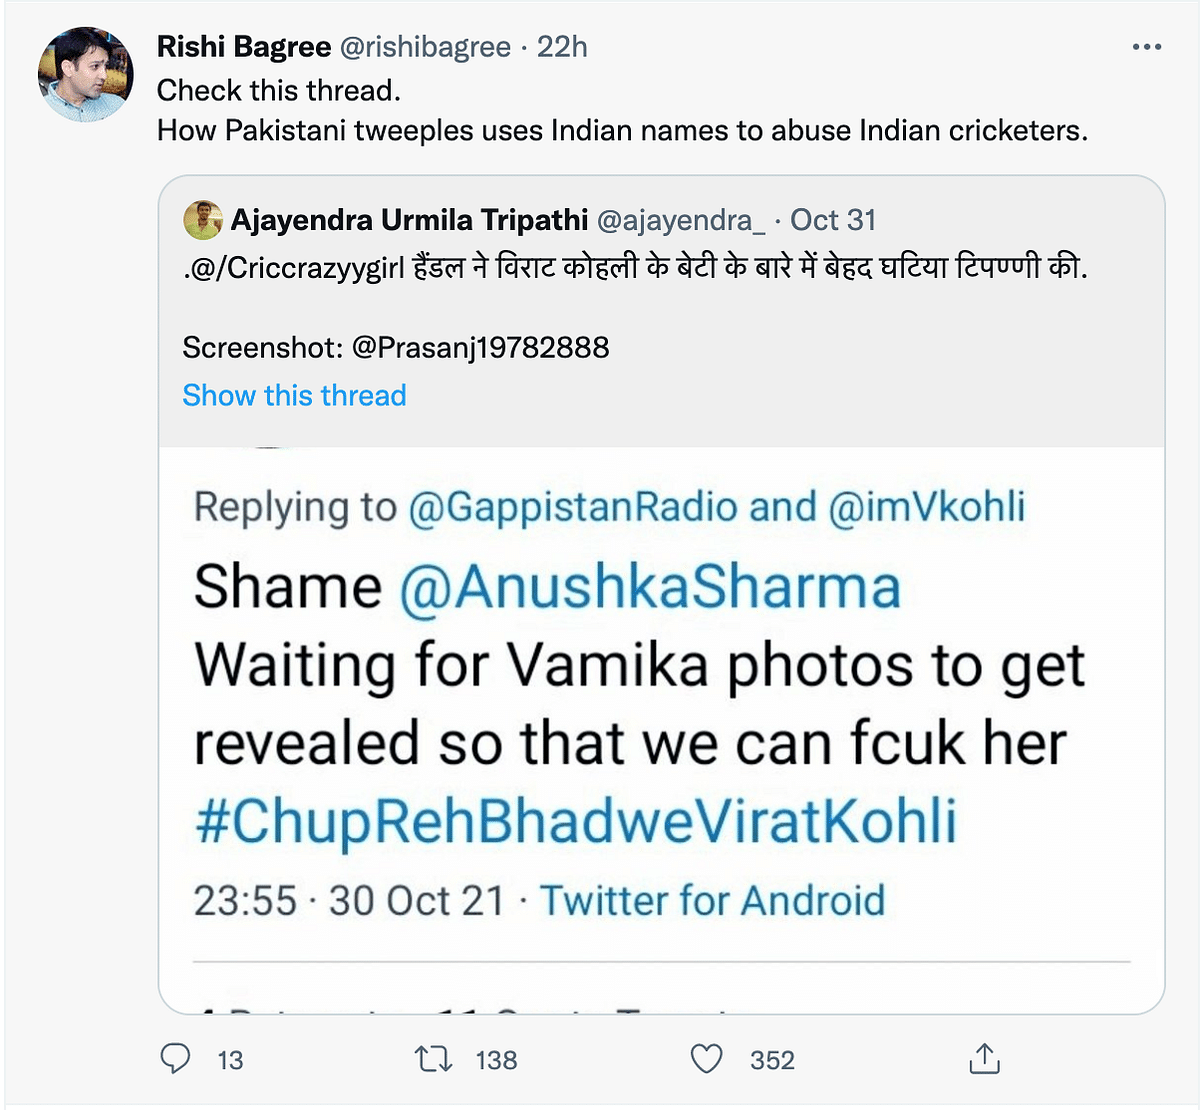 The account that posted abusive tweets about Virat Kohli has changed its username/handle six times since April.